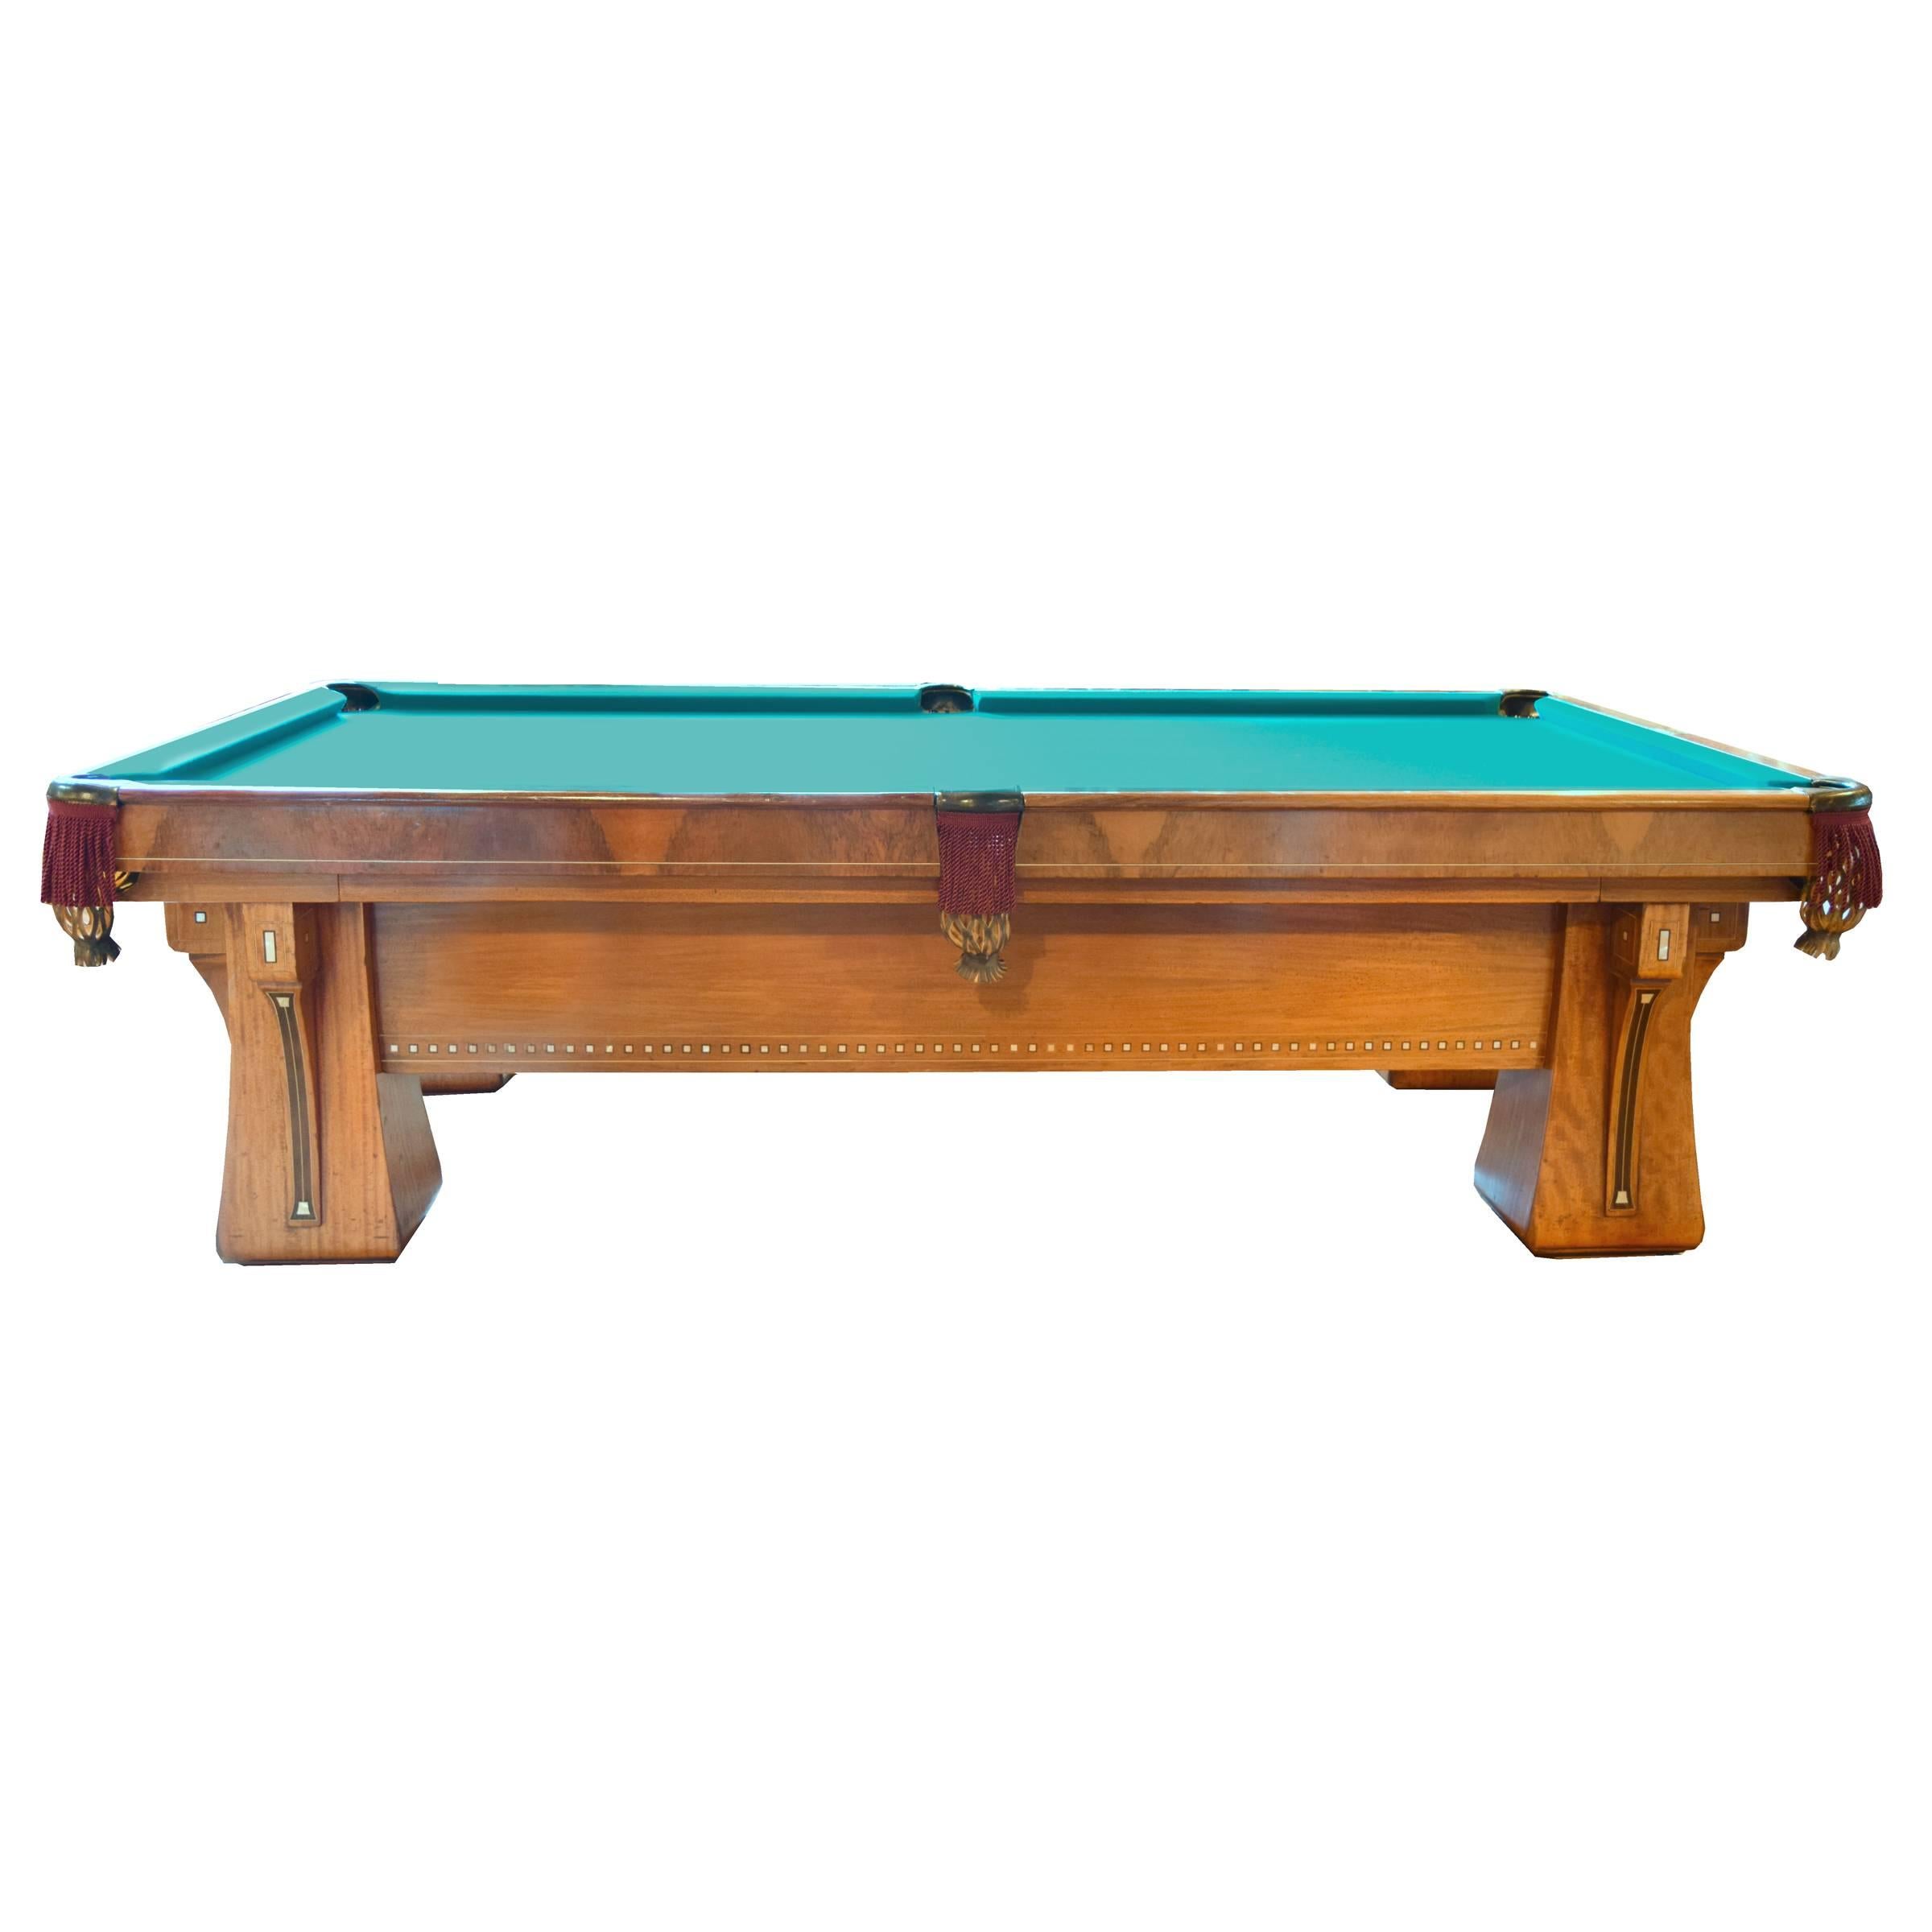 An impressive Brunswick Balke Collender Arcade 9 foot pool table in excellent condition with bookmatched burl trim, pearl inlays, and webbed leather pockets, circa 1920. Accompanying this table is a Brunswick bench, balls with wood rack, six cue